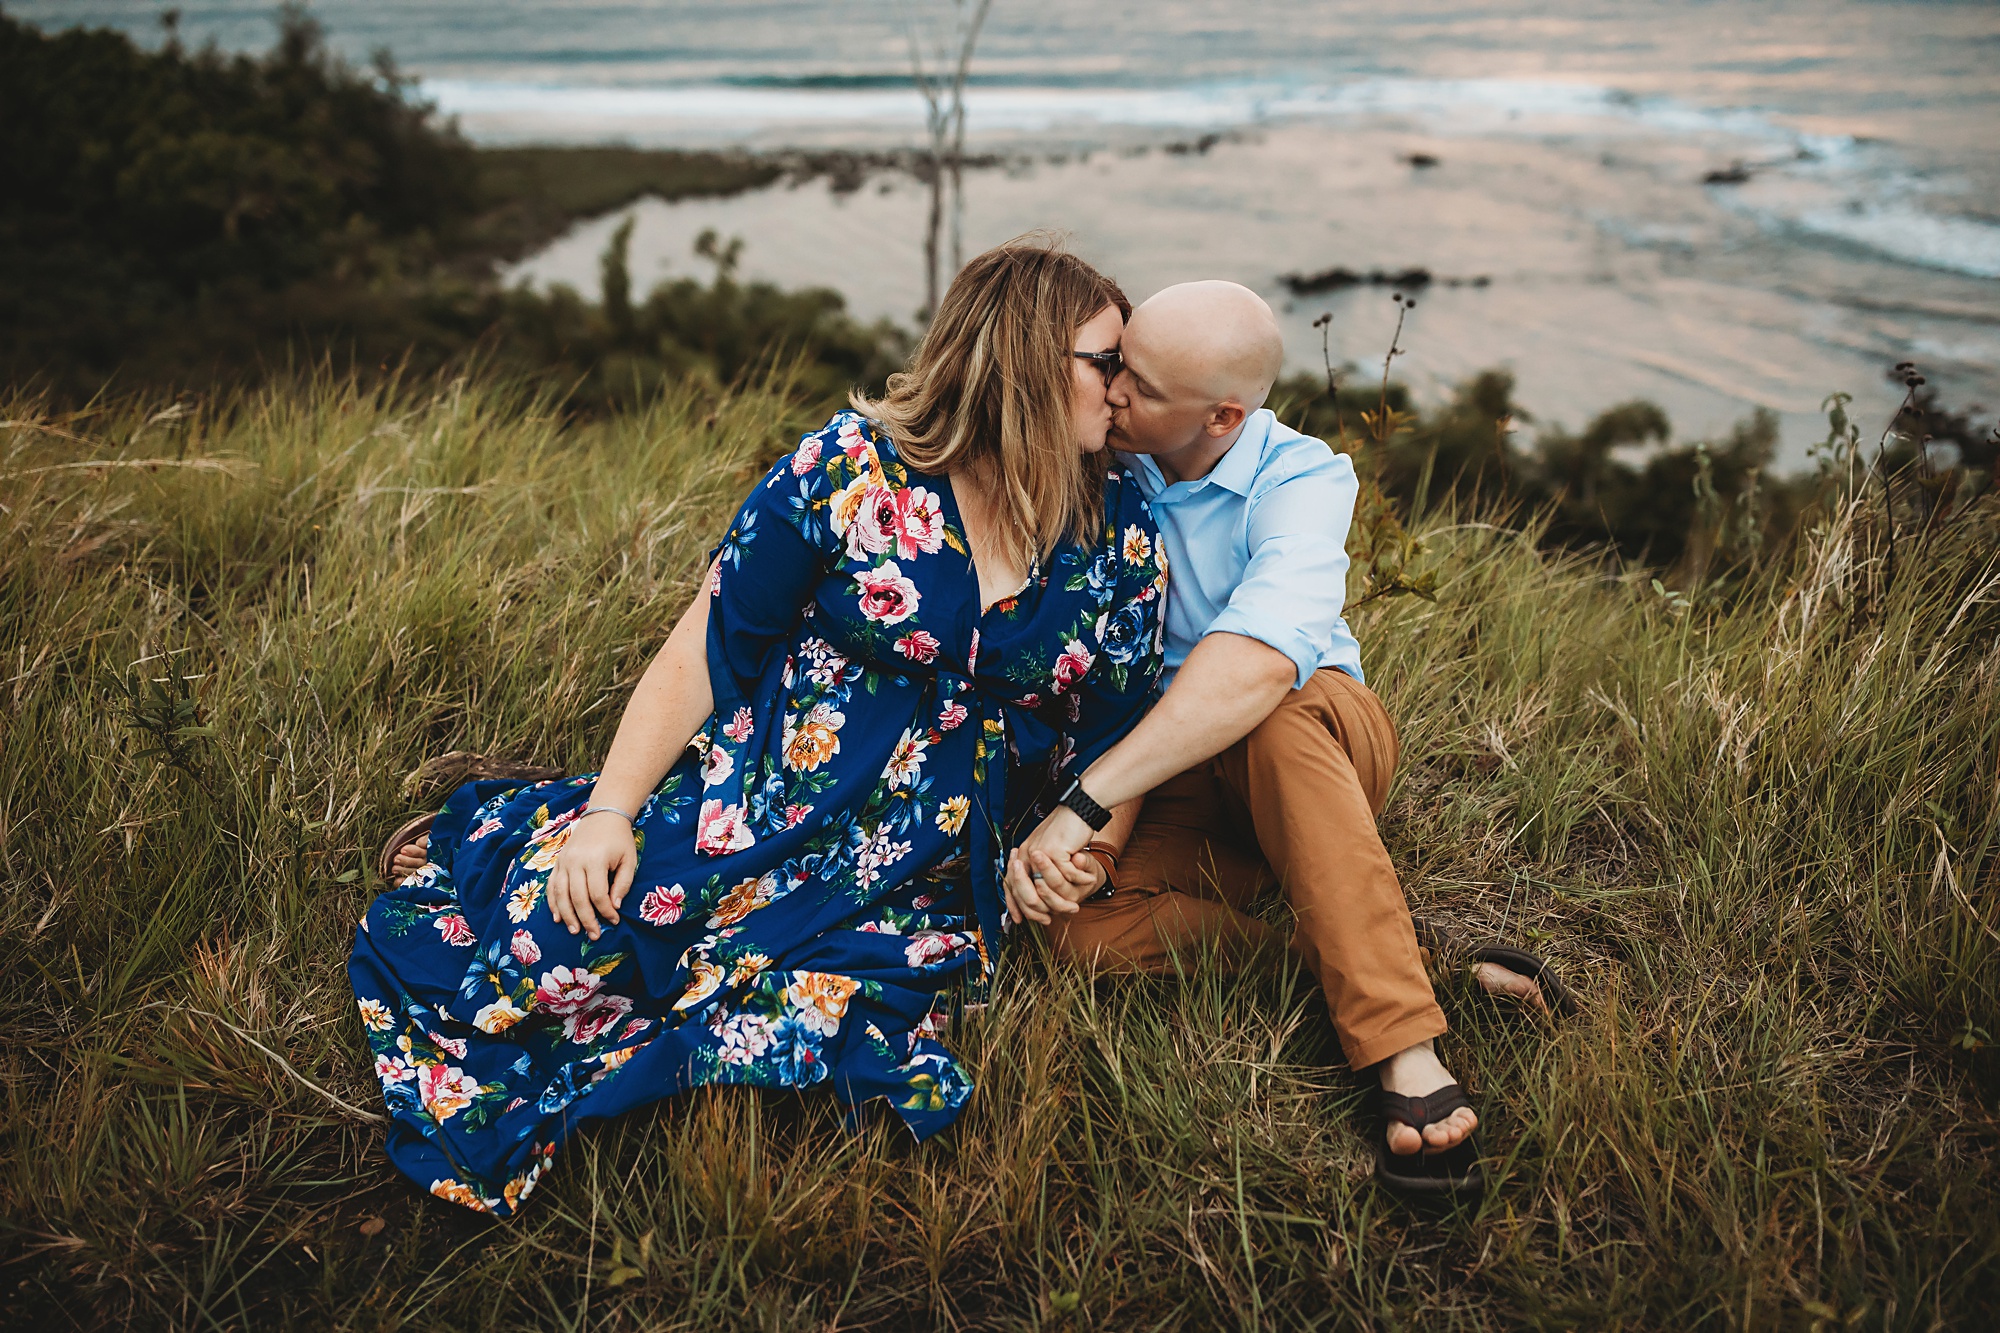 Guam-Stormy-Couples-Session